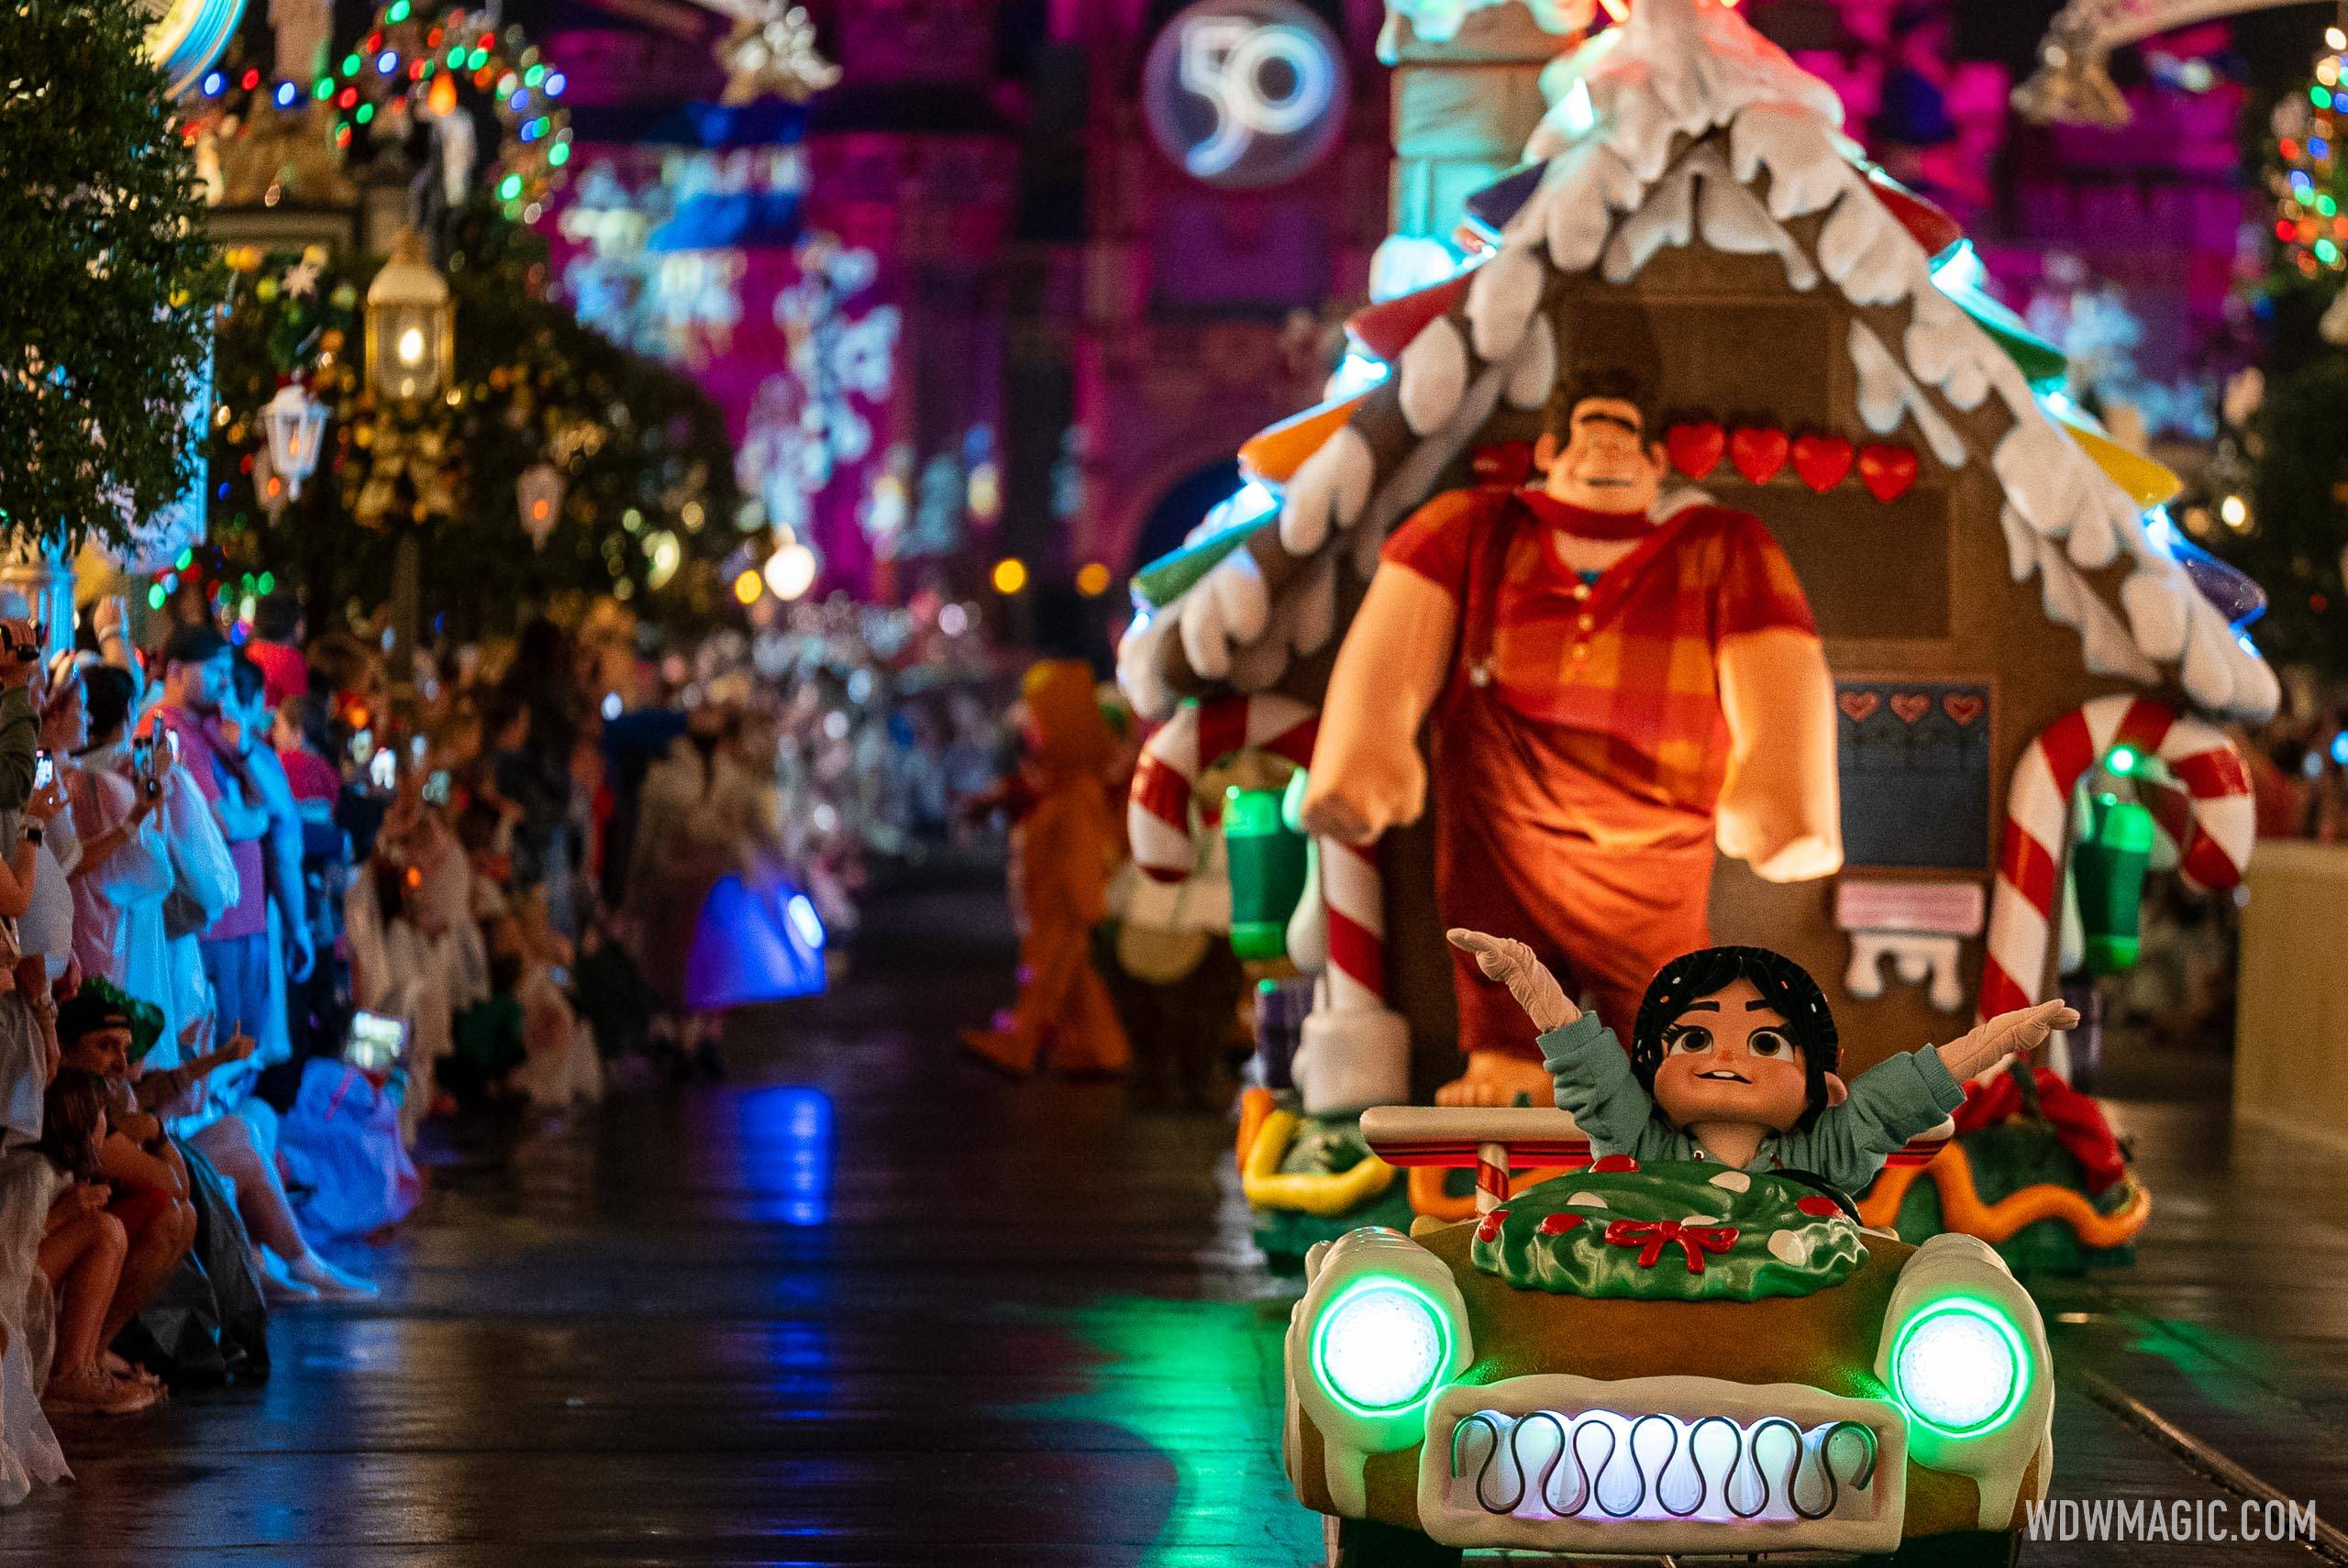 VIDEO - The 2011 Mickey's Once Upon A Christmastime Parade